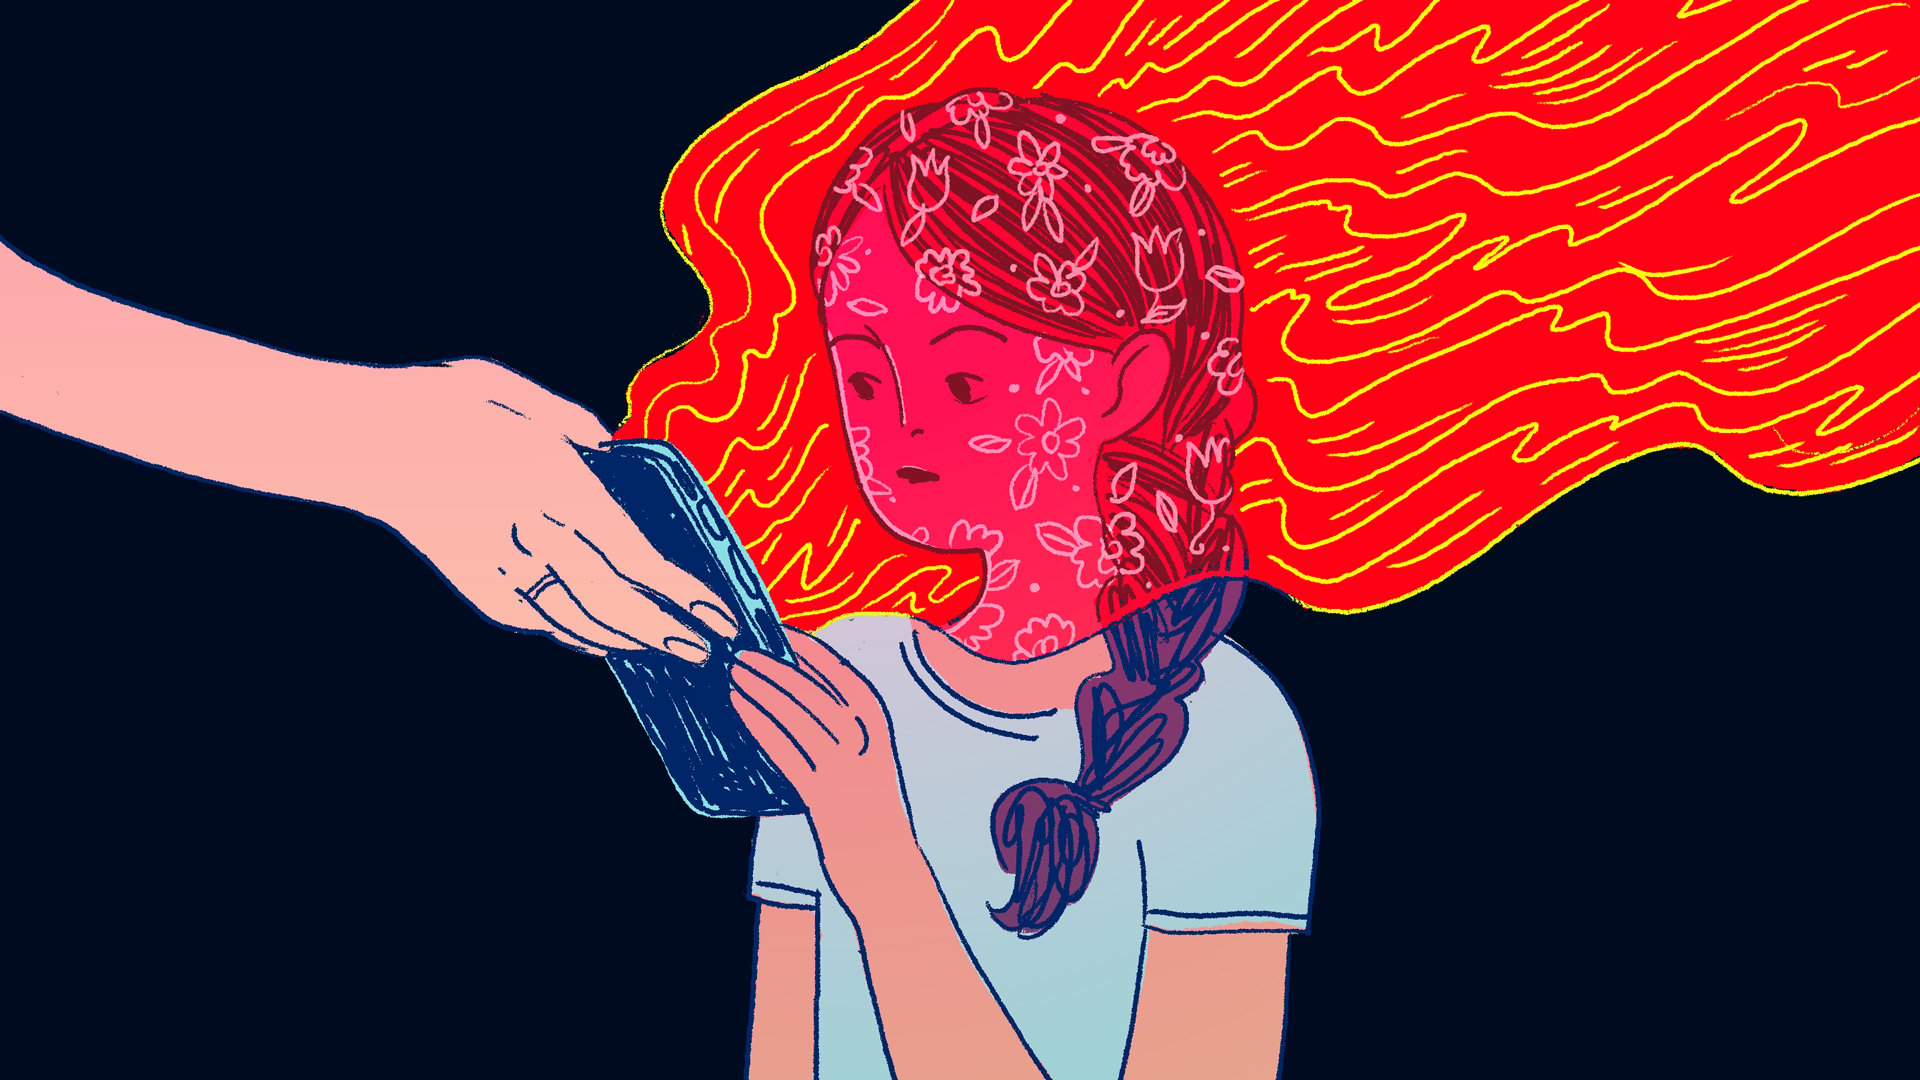 Illustrated version of a girl being handed a phone that's emanating a red cloud.